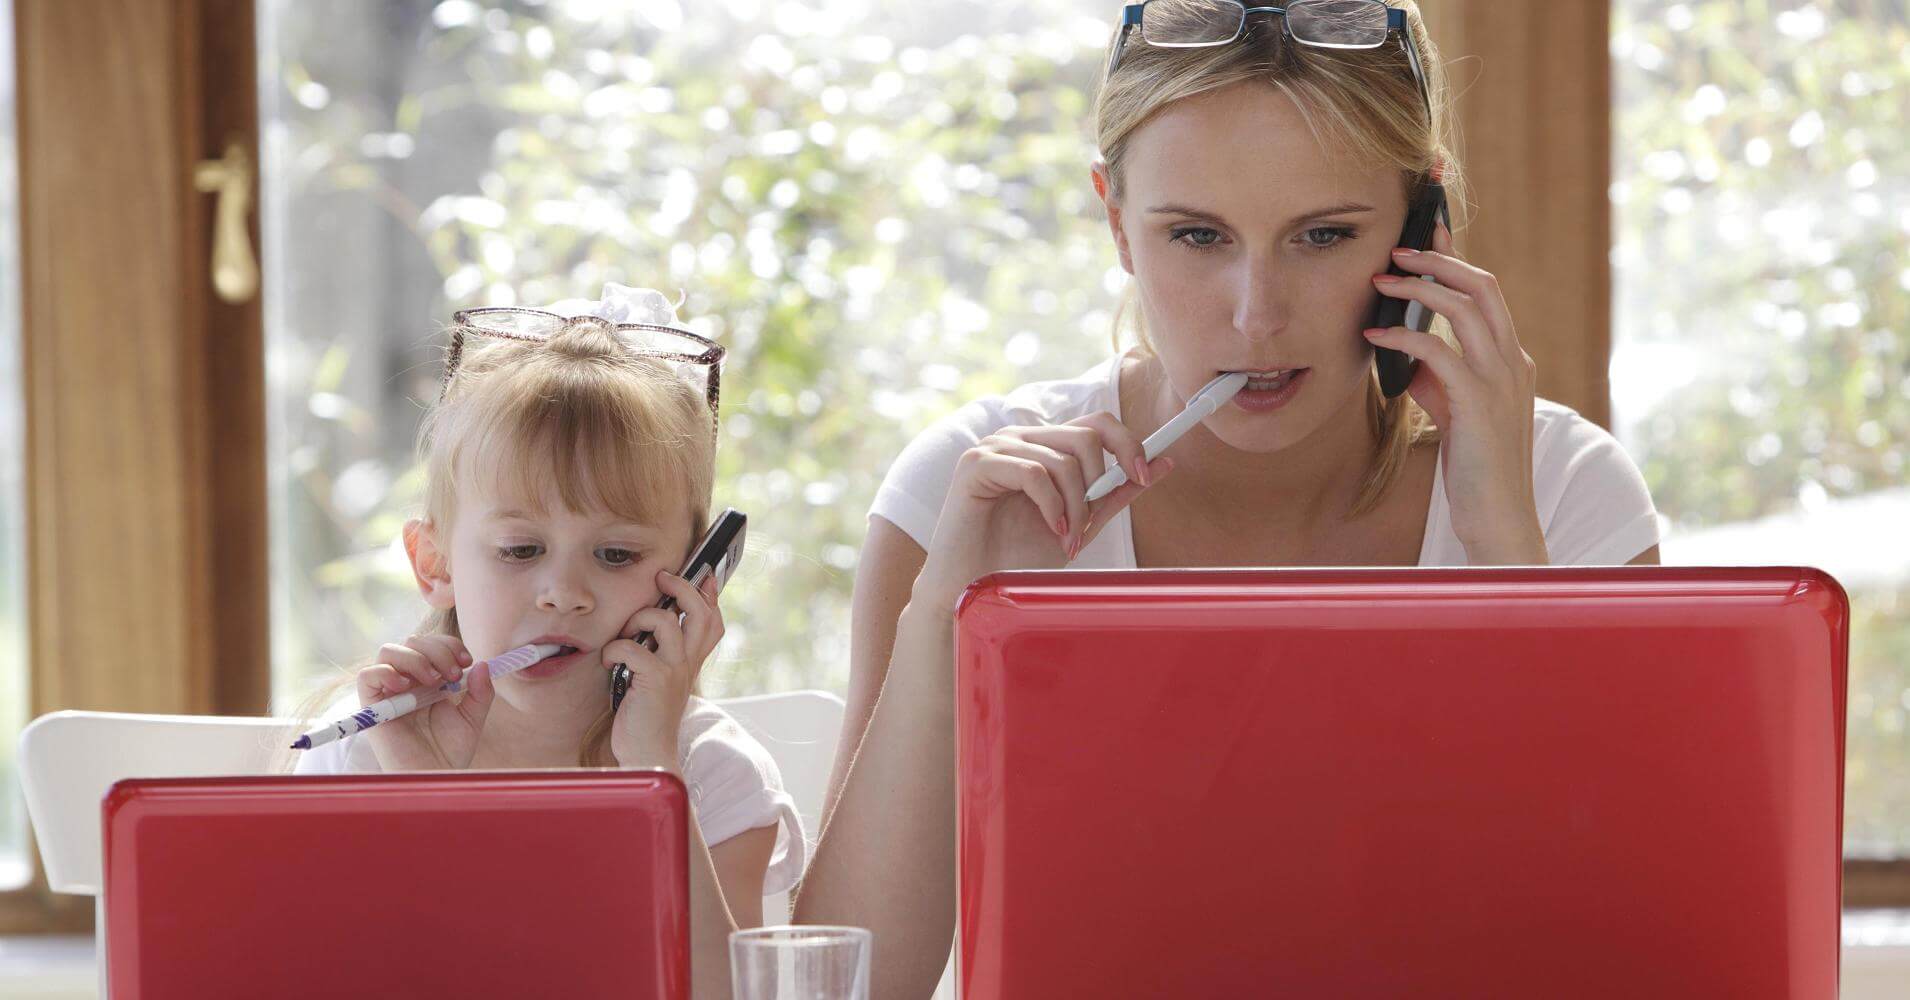 how to work from home with kids